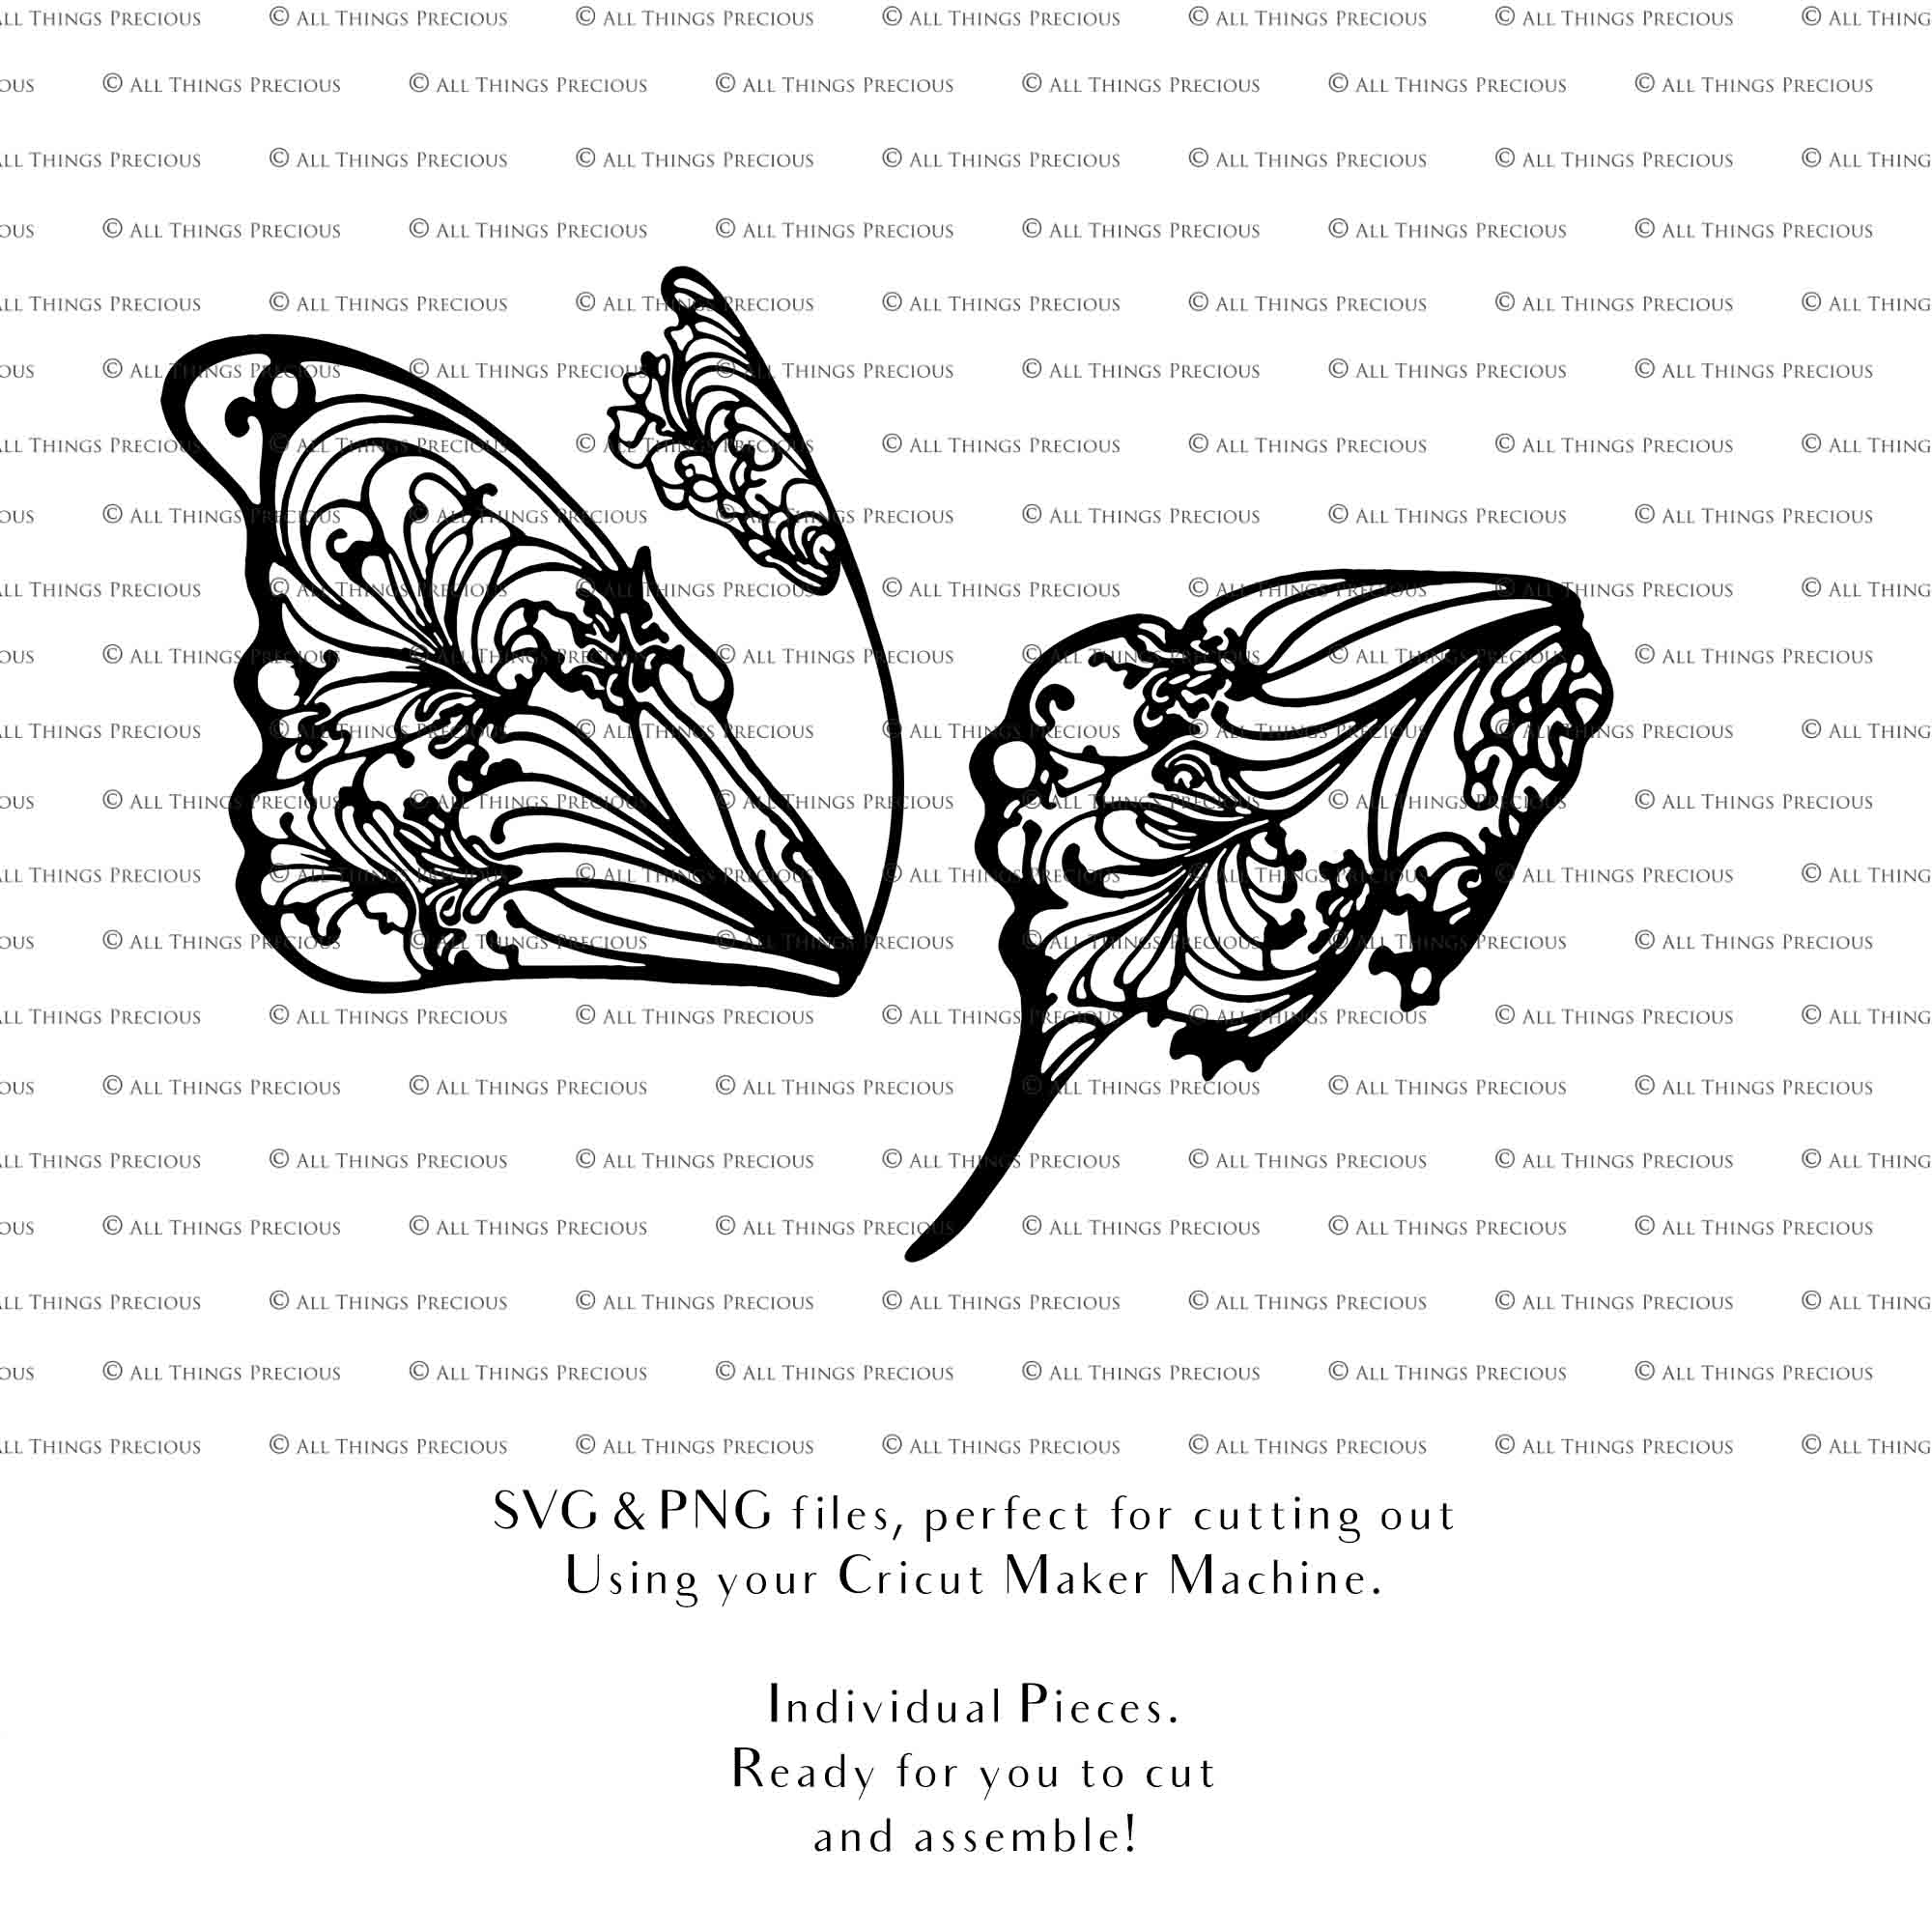 SVG & PNG Fairy Wing files for Cricut or Silhouette Cameo Cutting Machine. To create wearable fairy wings, in adult or children sizes. Graphic design for Halloween Costumes, Fantasy or Cosplay or photography. Print for weddings, engagements, baby shower invitations. DIY Printable. Fairycore, Cottagecore.